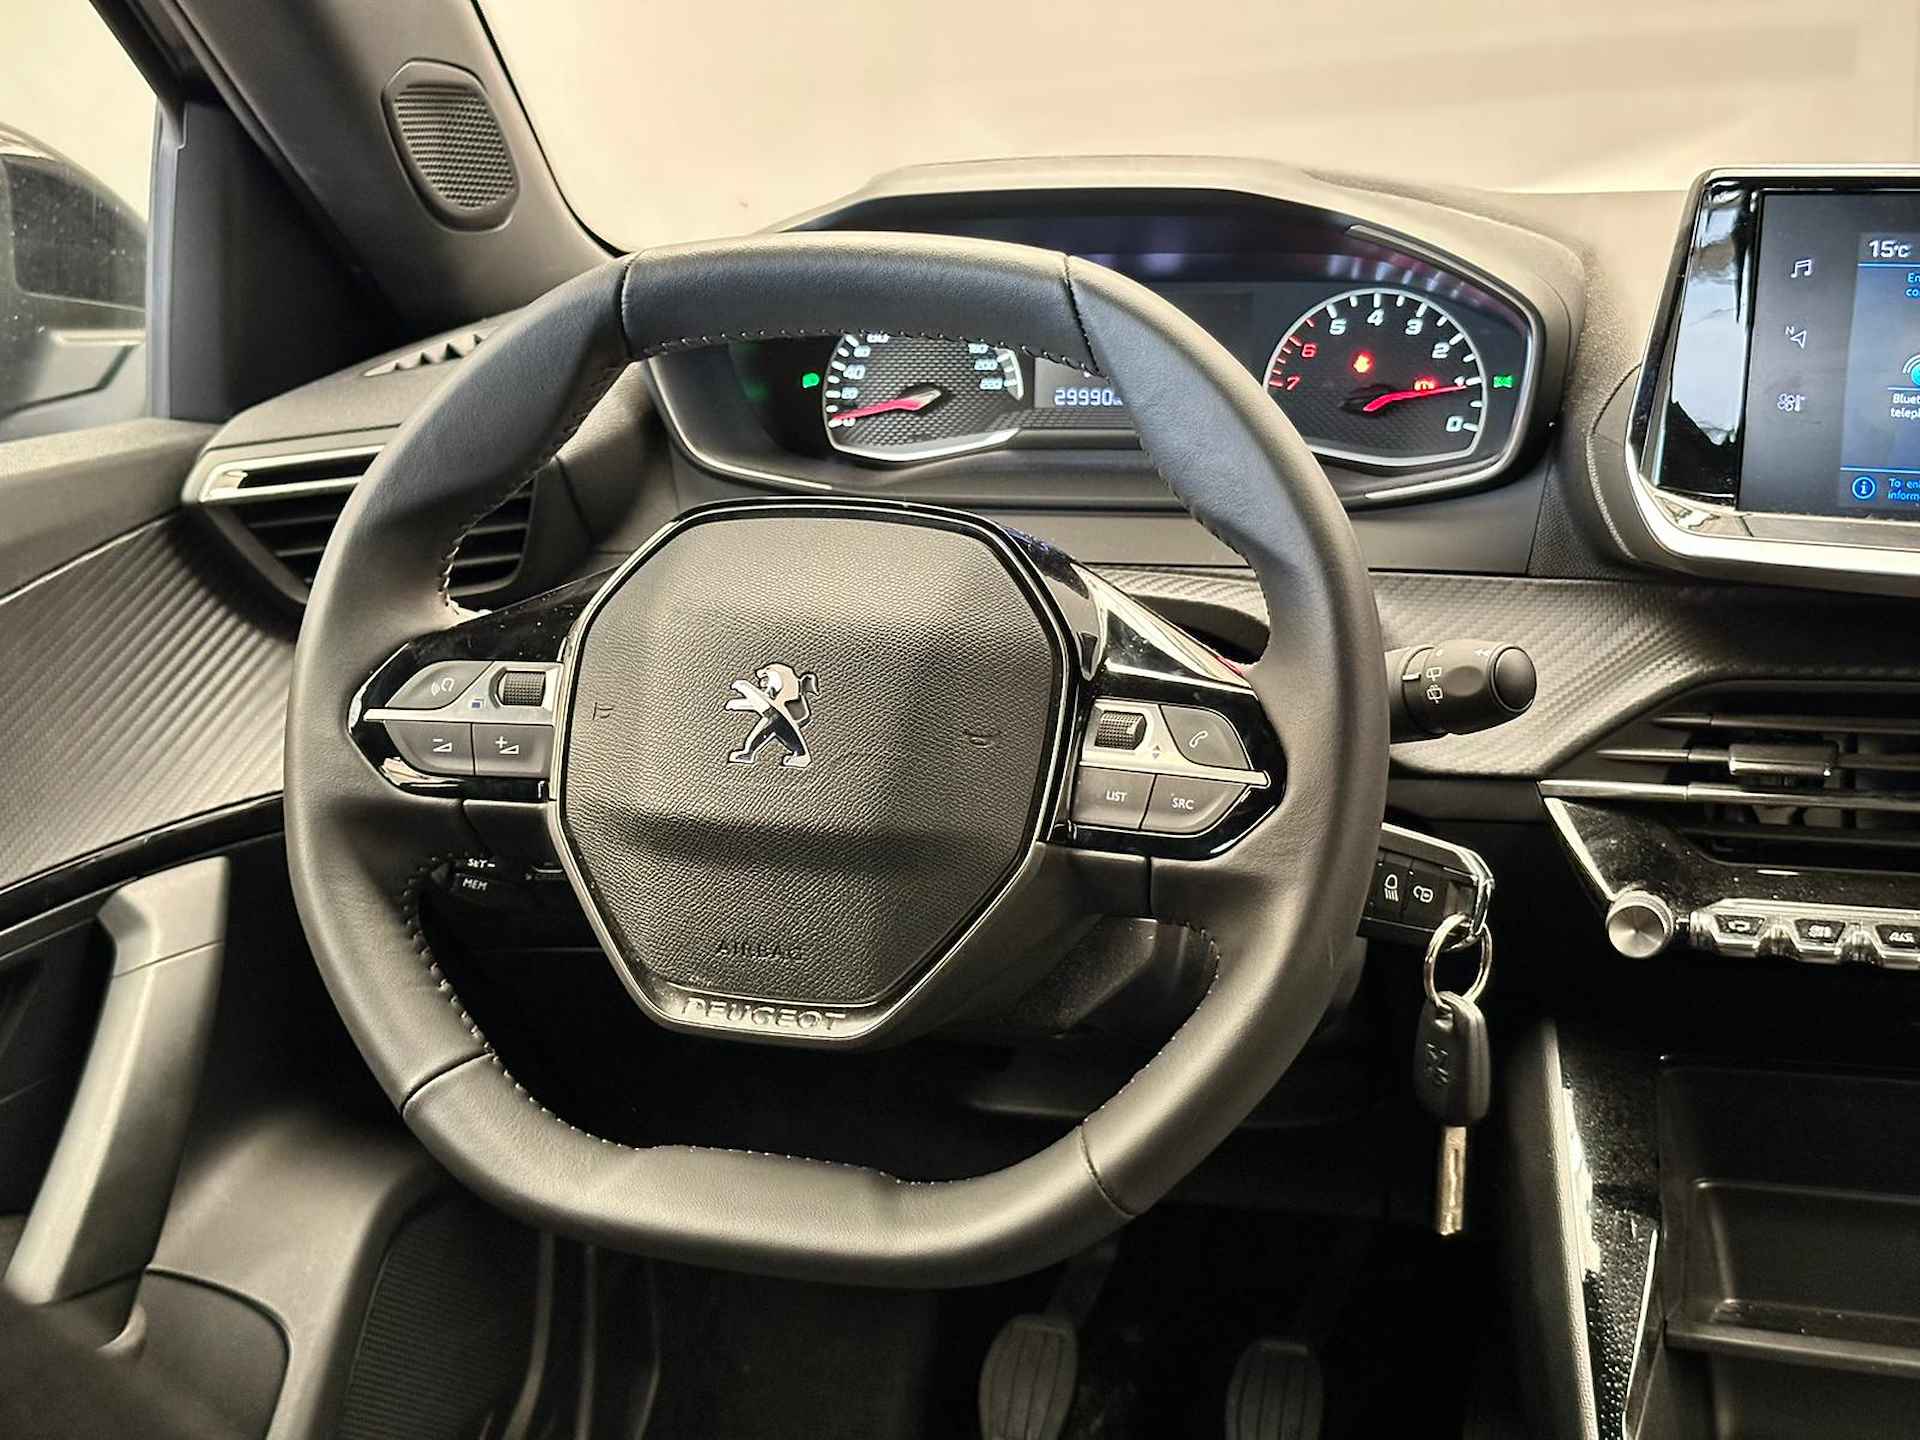 Peugeot 2008 1.2 100PK Active | Parkeersensoren Achter | Apple/Android Carplay | Airco | Cruise | LED | DAB | Bluetooth | Centrale Vergrendeling - 15/23